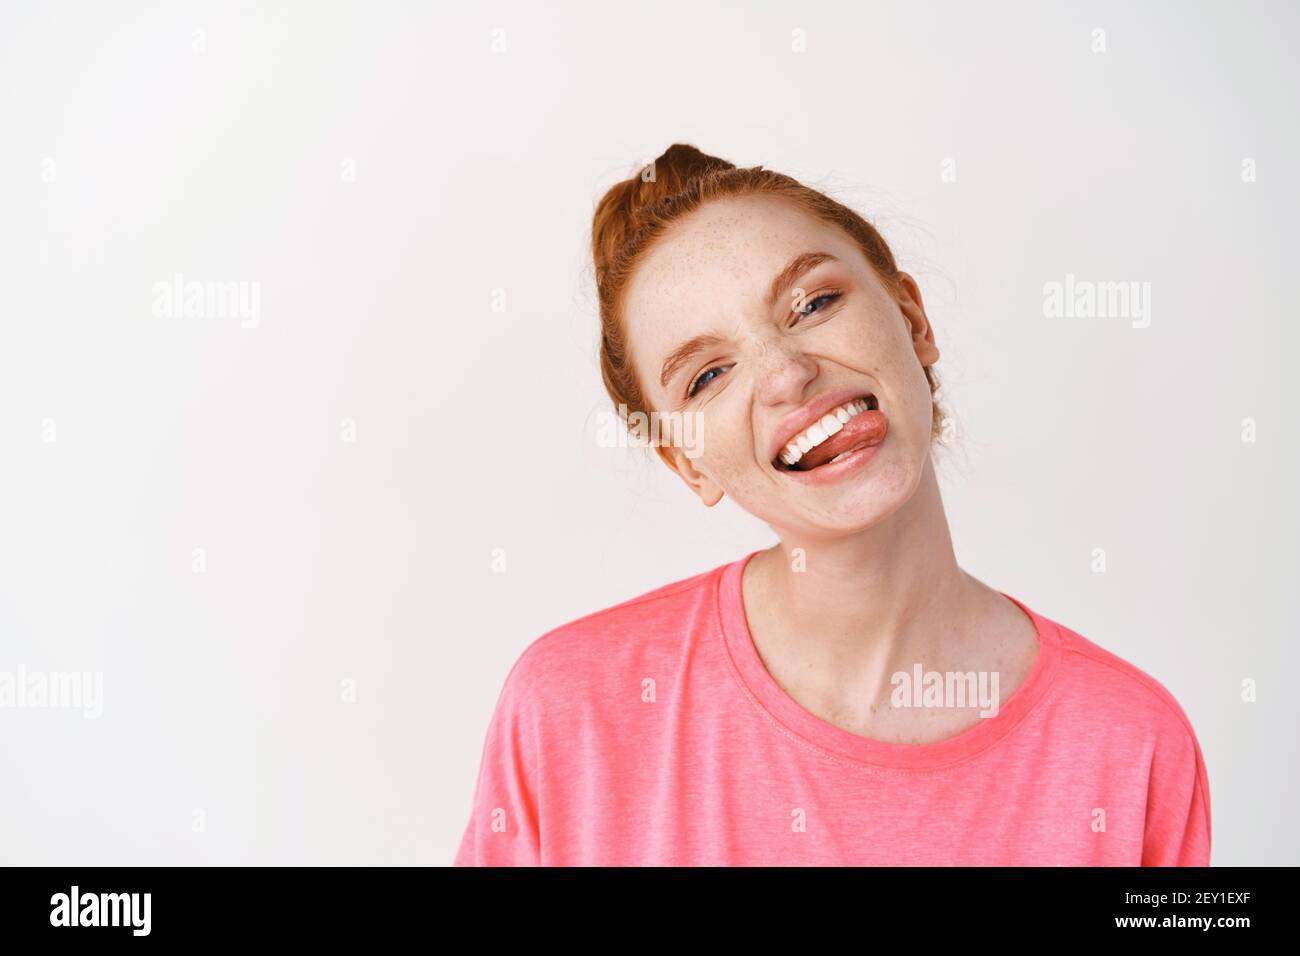 Cheerful teenage girl with ginger hair combed in messy bun, showing white smile and tongue, standing against white background in pink t-shirt Stock Photo